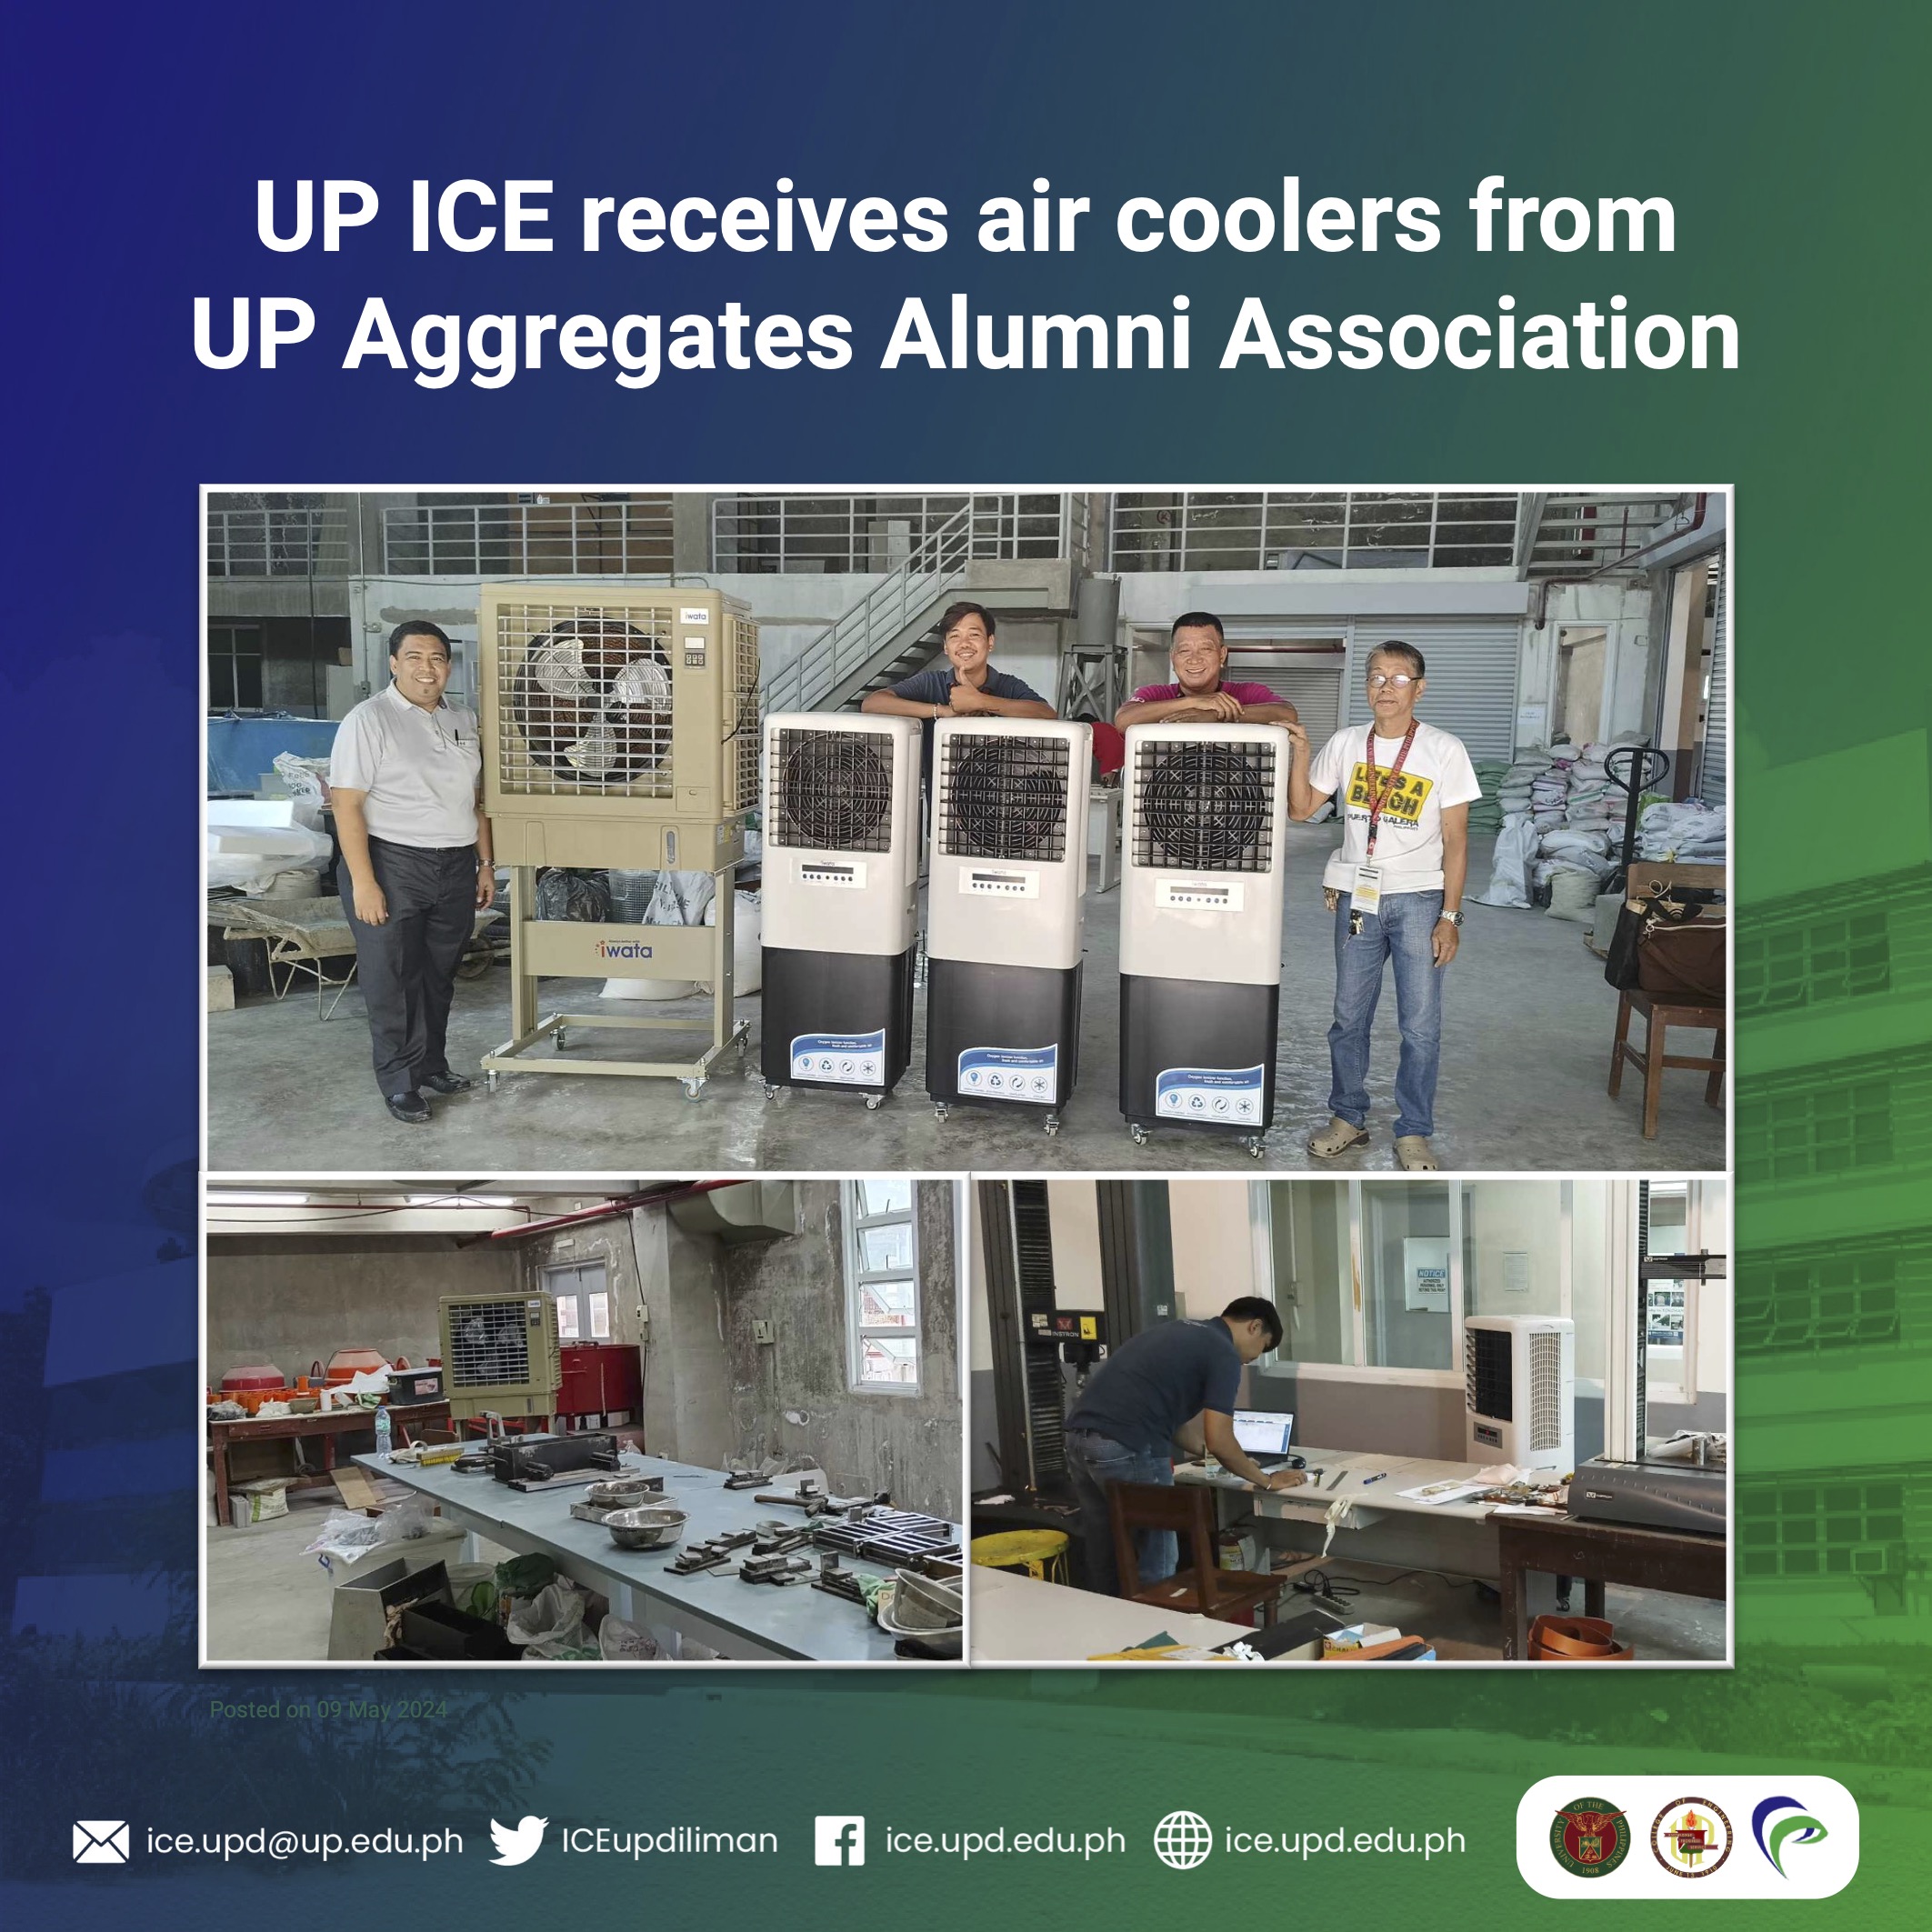 UP ICE receives air coolers from UP Aggregates Alumni Association